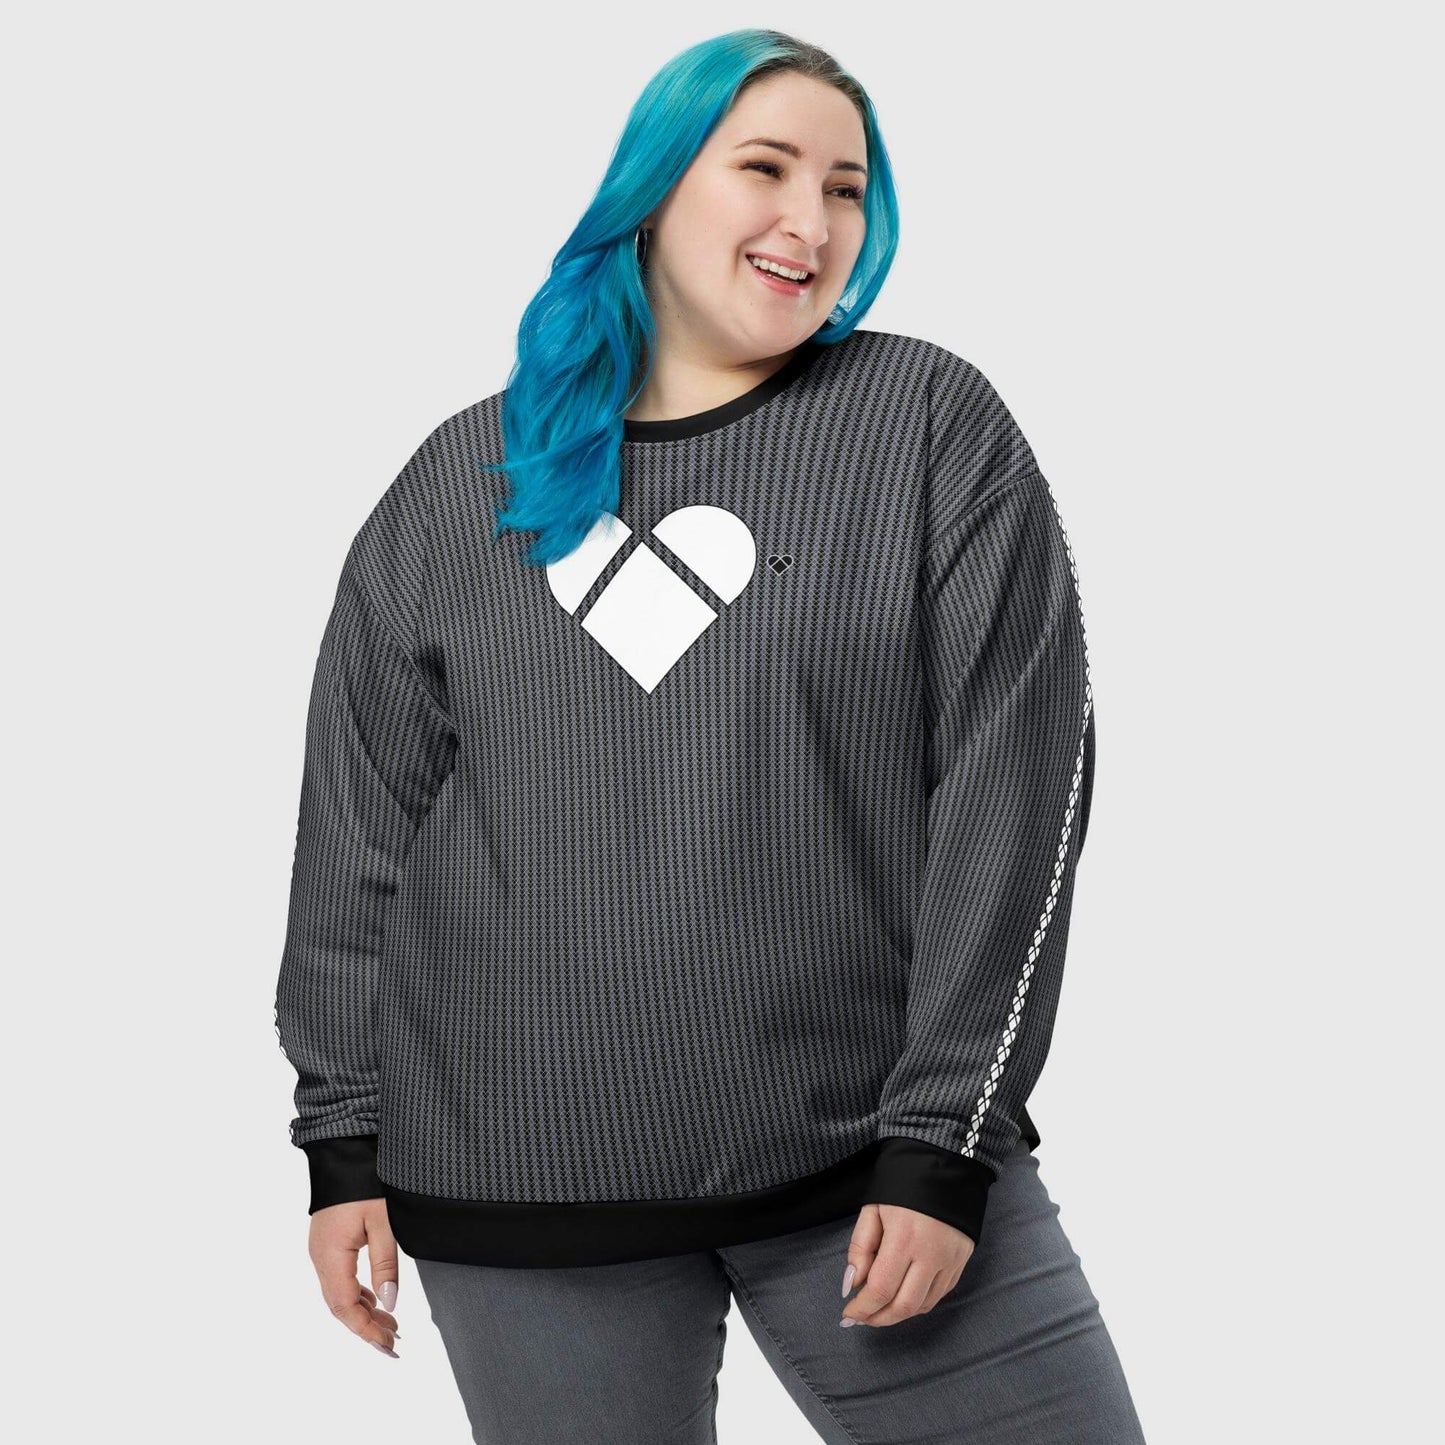 CRiZ AMOR's black Lovogram Heart Sweatshirt, made sustainably for everyone, with a unique pattern and a comfortable fabric, girl wearing